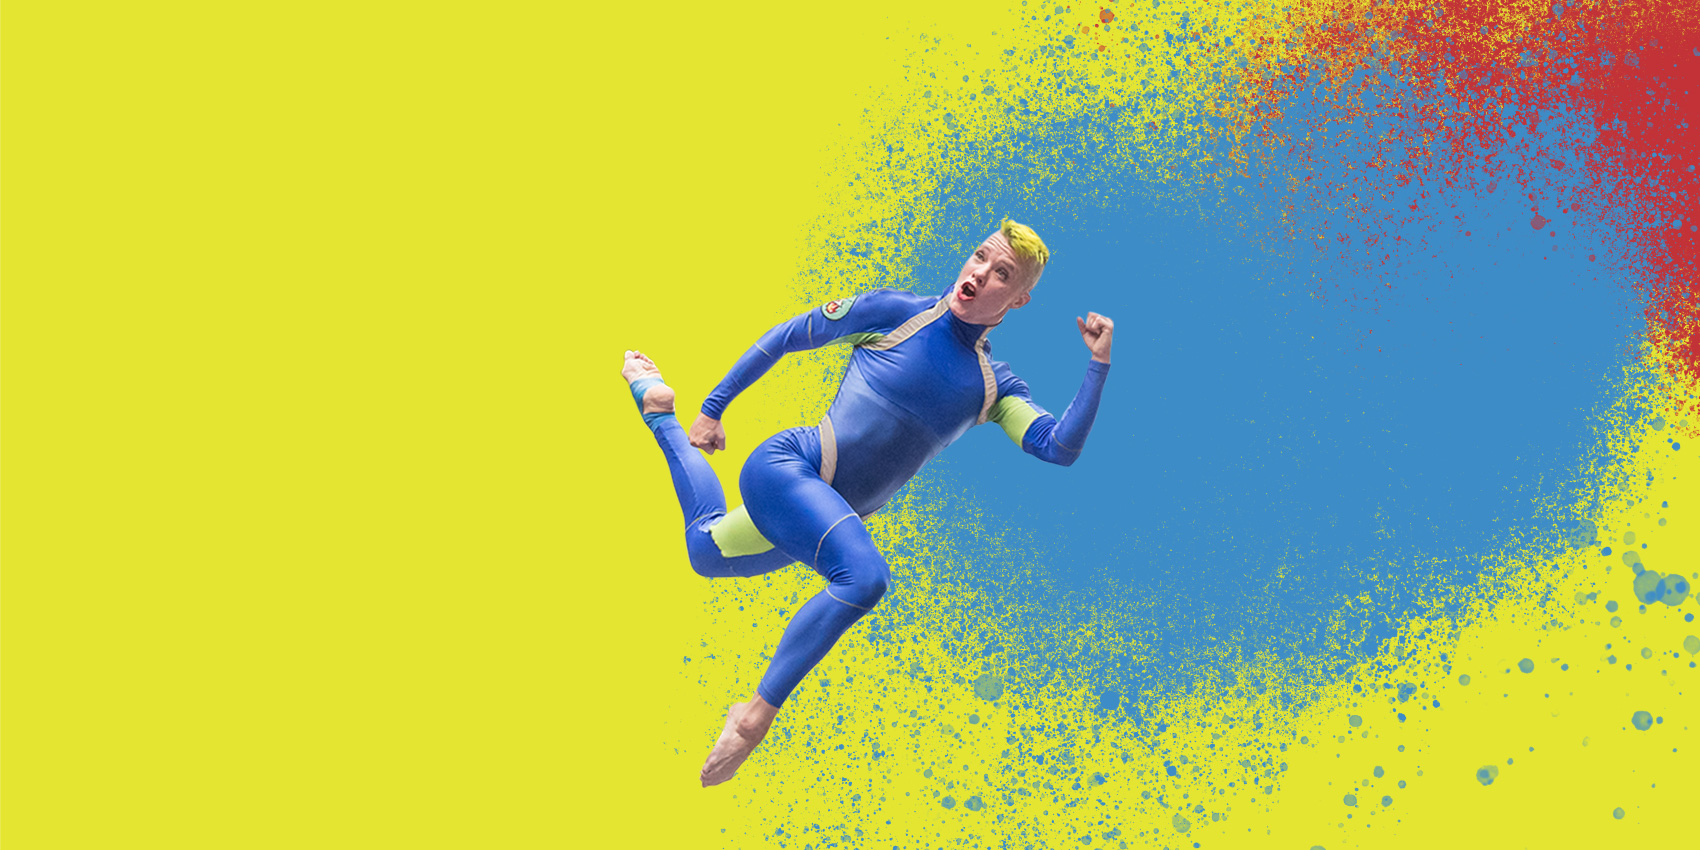 Dancer in blue suit jumping against bright background with paint splatters